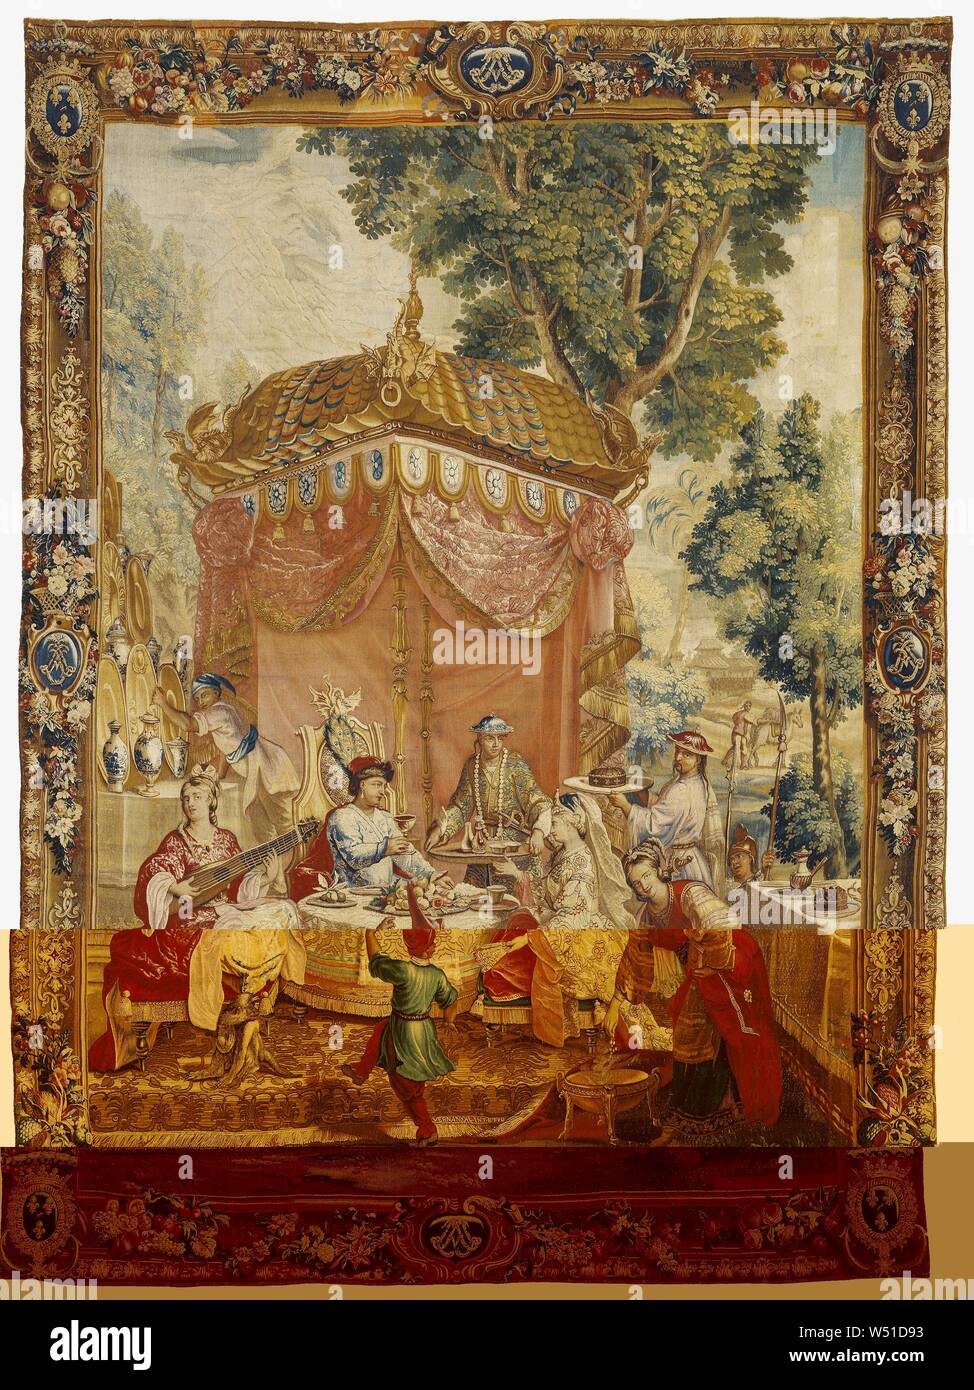 Tapestry: The Collation from The Story of the Emperor of China Series, After cartoons by Guy-Louis Vernansal (French, 1648 - 1729), and Jean-Baptiste Monnoyer (French, 1636 - 1699), and Jean-Baptiste Belin de Fontenay (French, 1653 - 1715), Beauvais Manufactory (French, founded 1664), woven under the direction of Philippe Béhagle (French, 1641 - 1705), Beauvais, France, about 1697 - 1705, Wool and silk, 309.9 x 422.9 cm (122 x 166 1/2 in Stock Photo